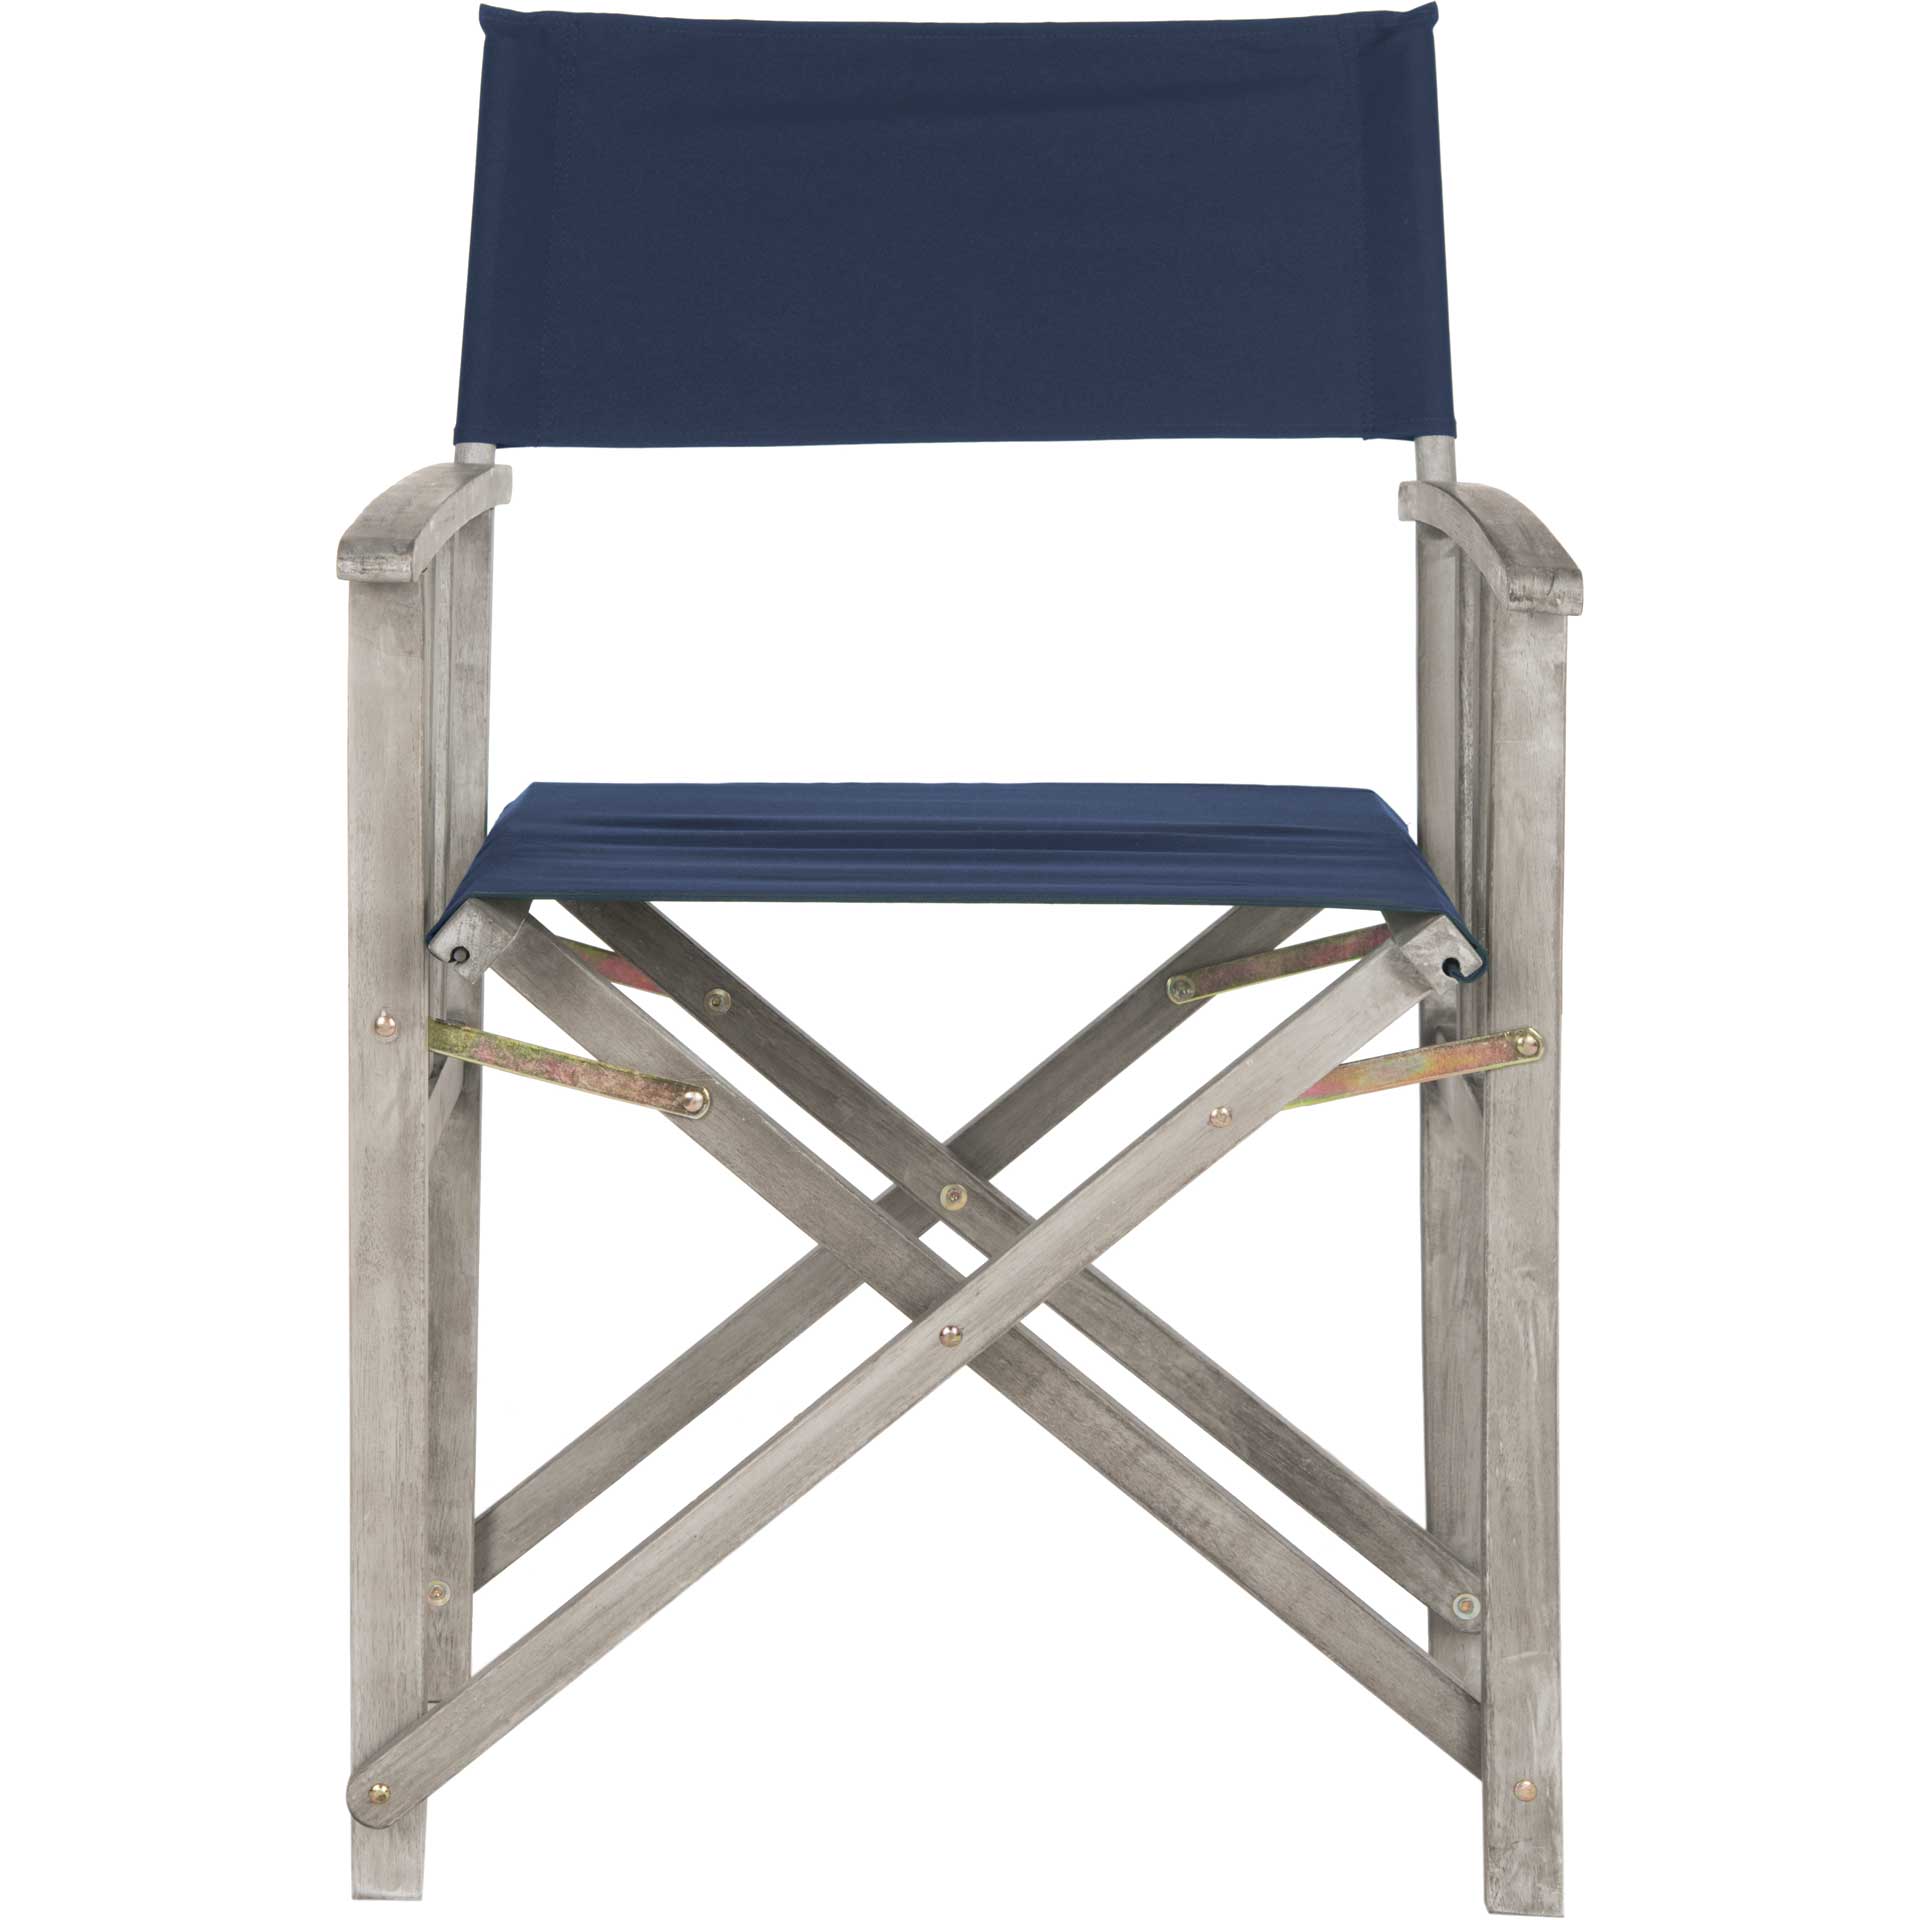 Lachlyn Director Chair Gray Wash/Navy (Set of 2)